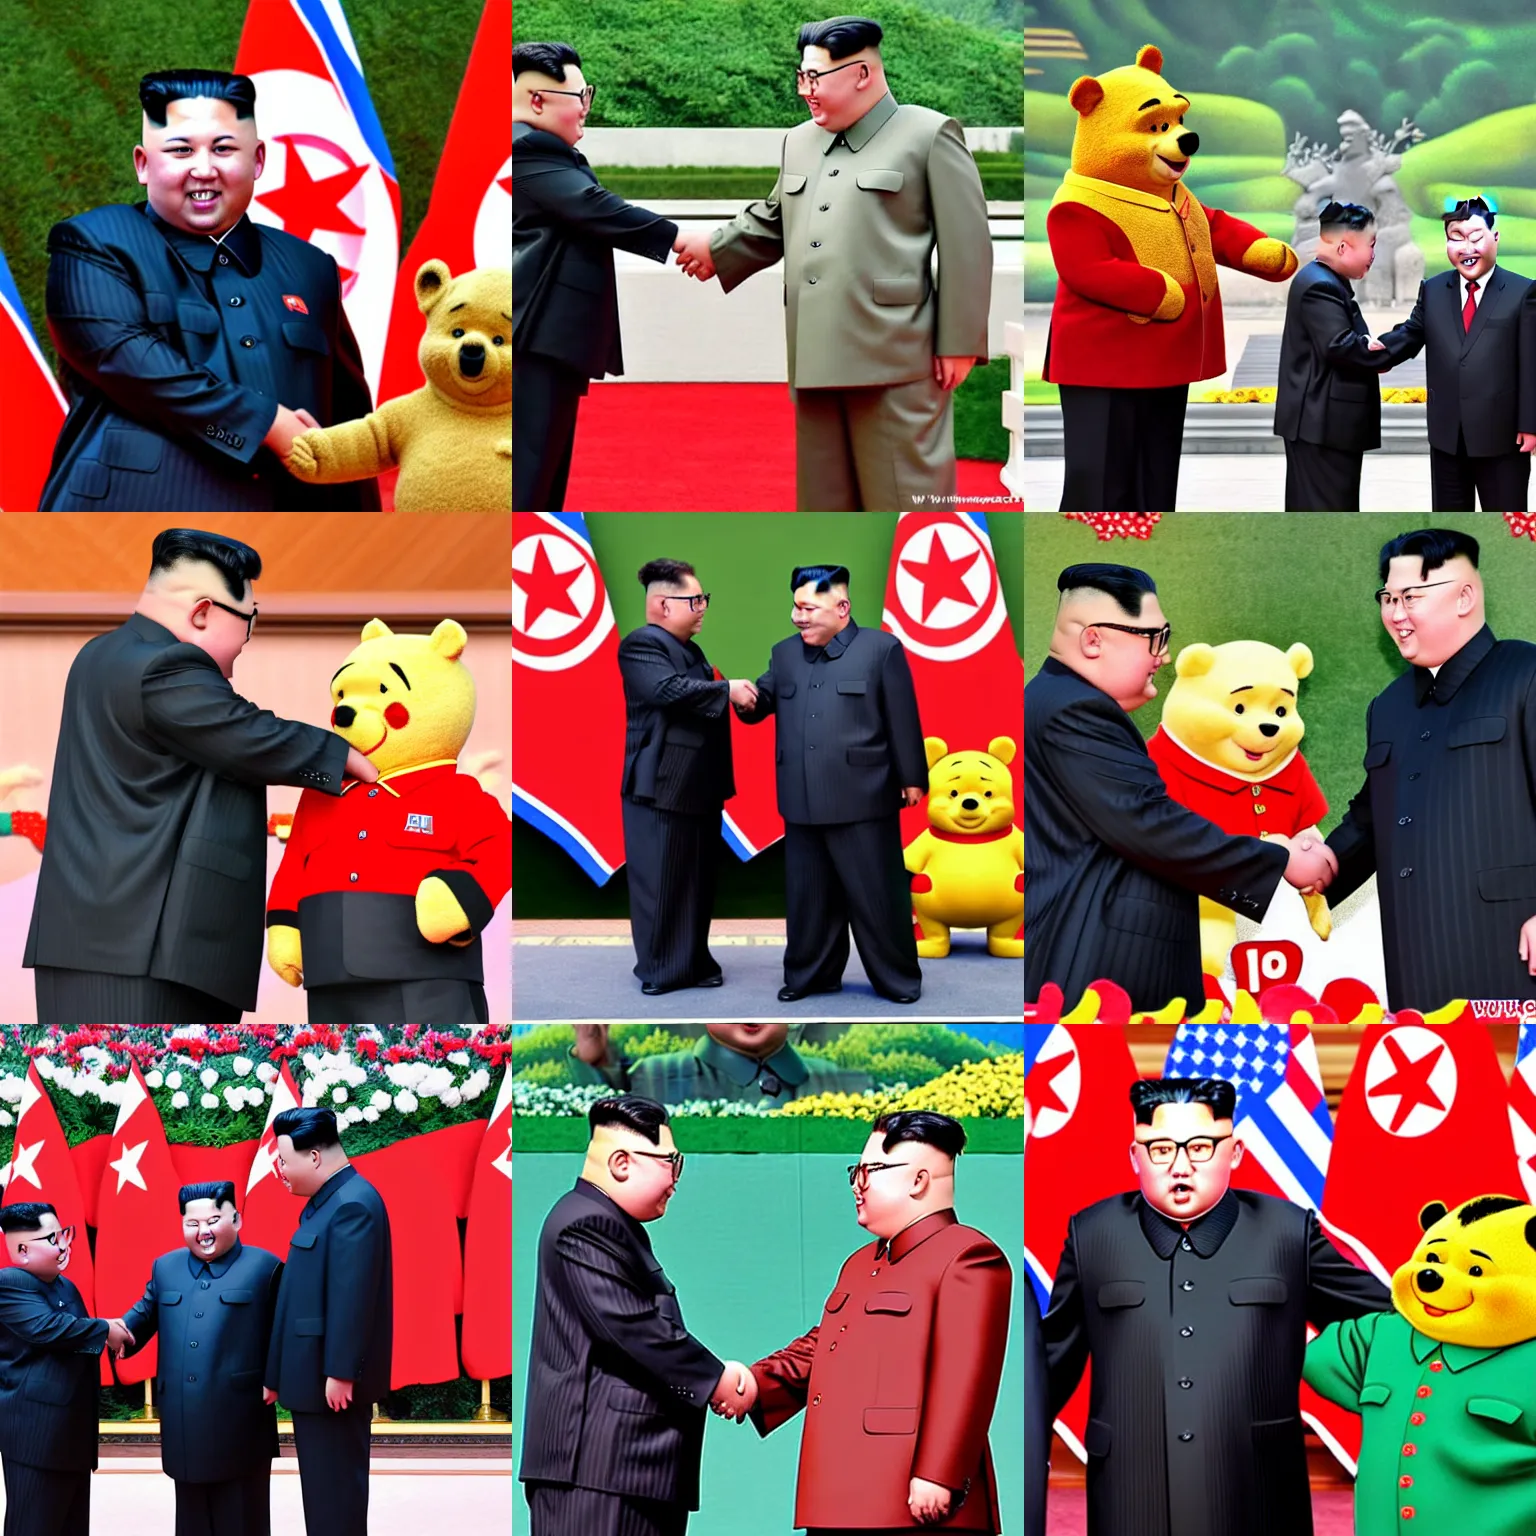 Prompt: kim jong un shaking hands with winnie the pooh on podium, in front of citizens